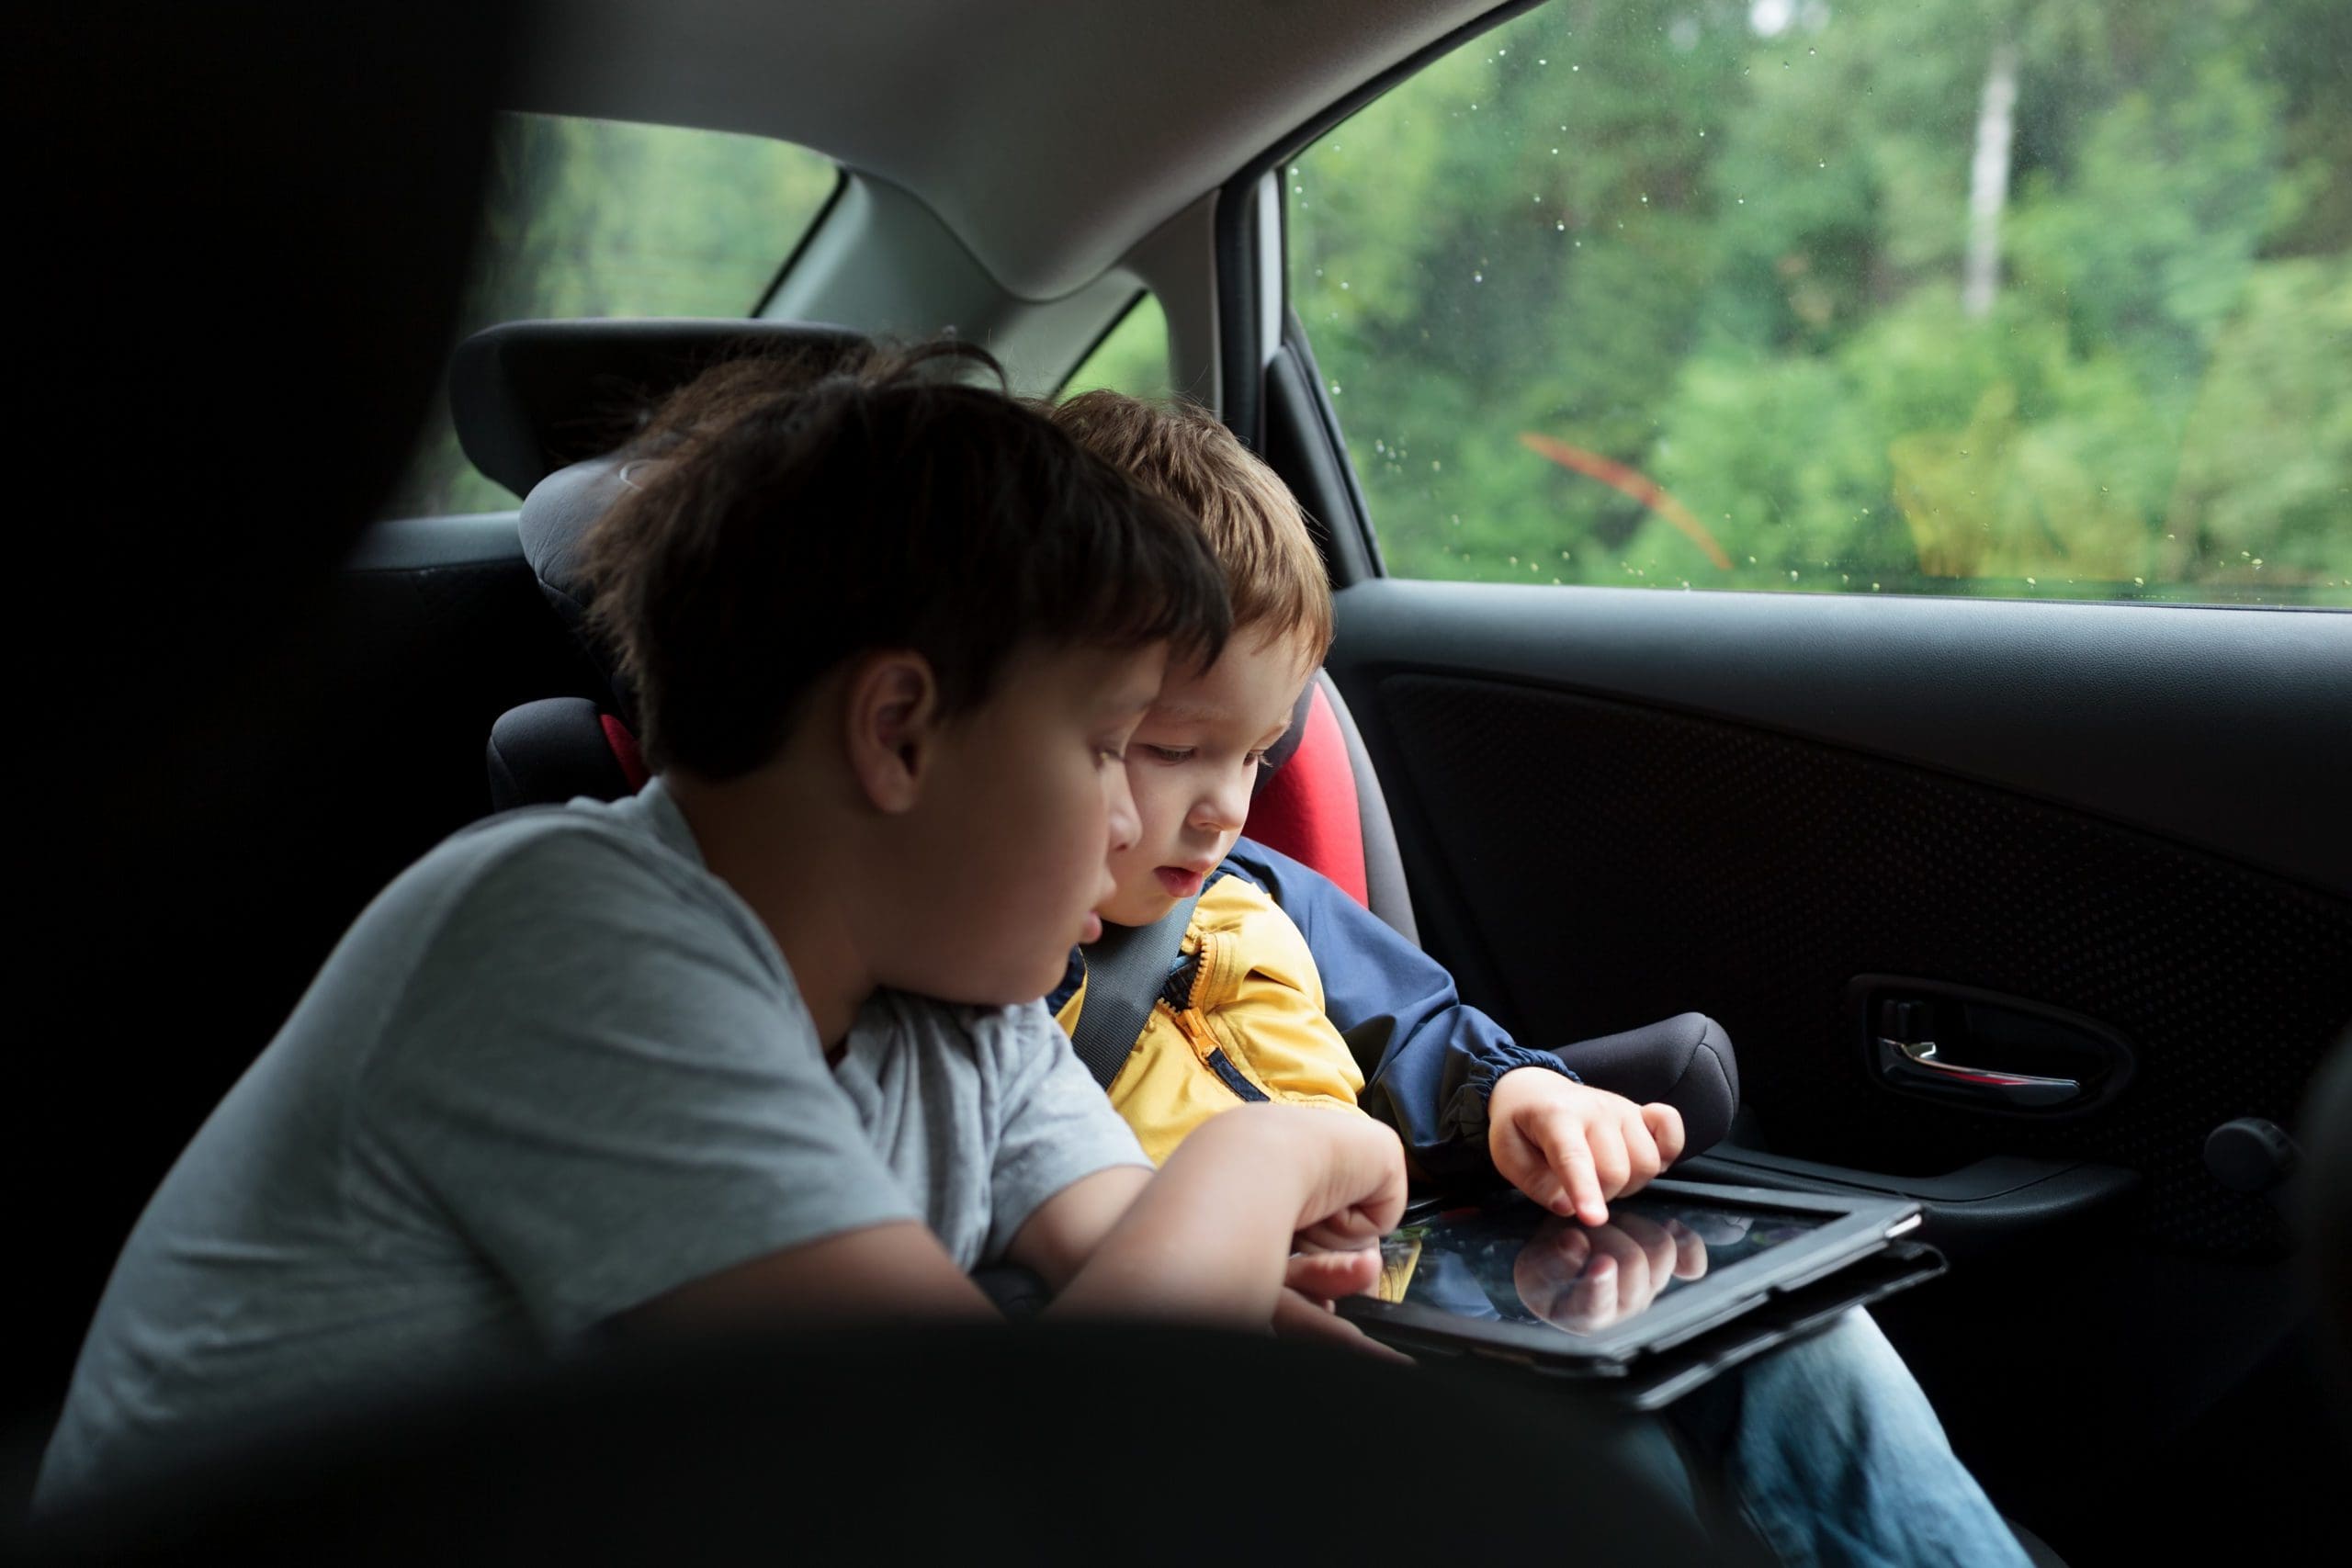 Boys in the car using a touchpad